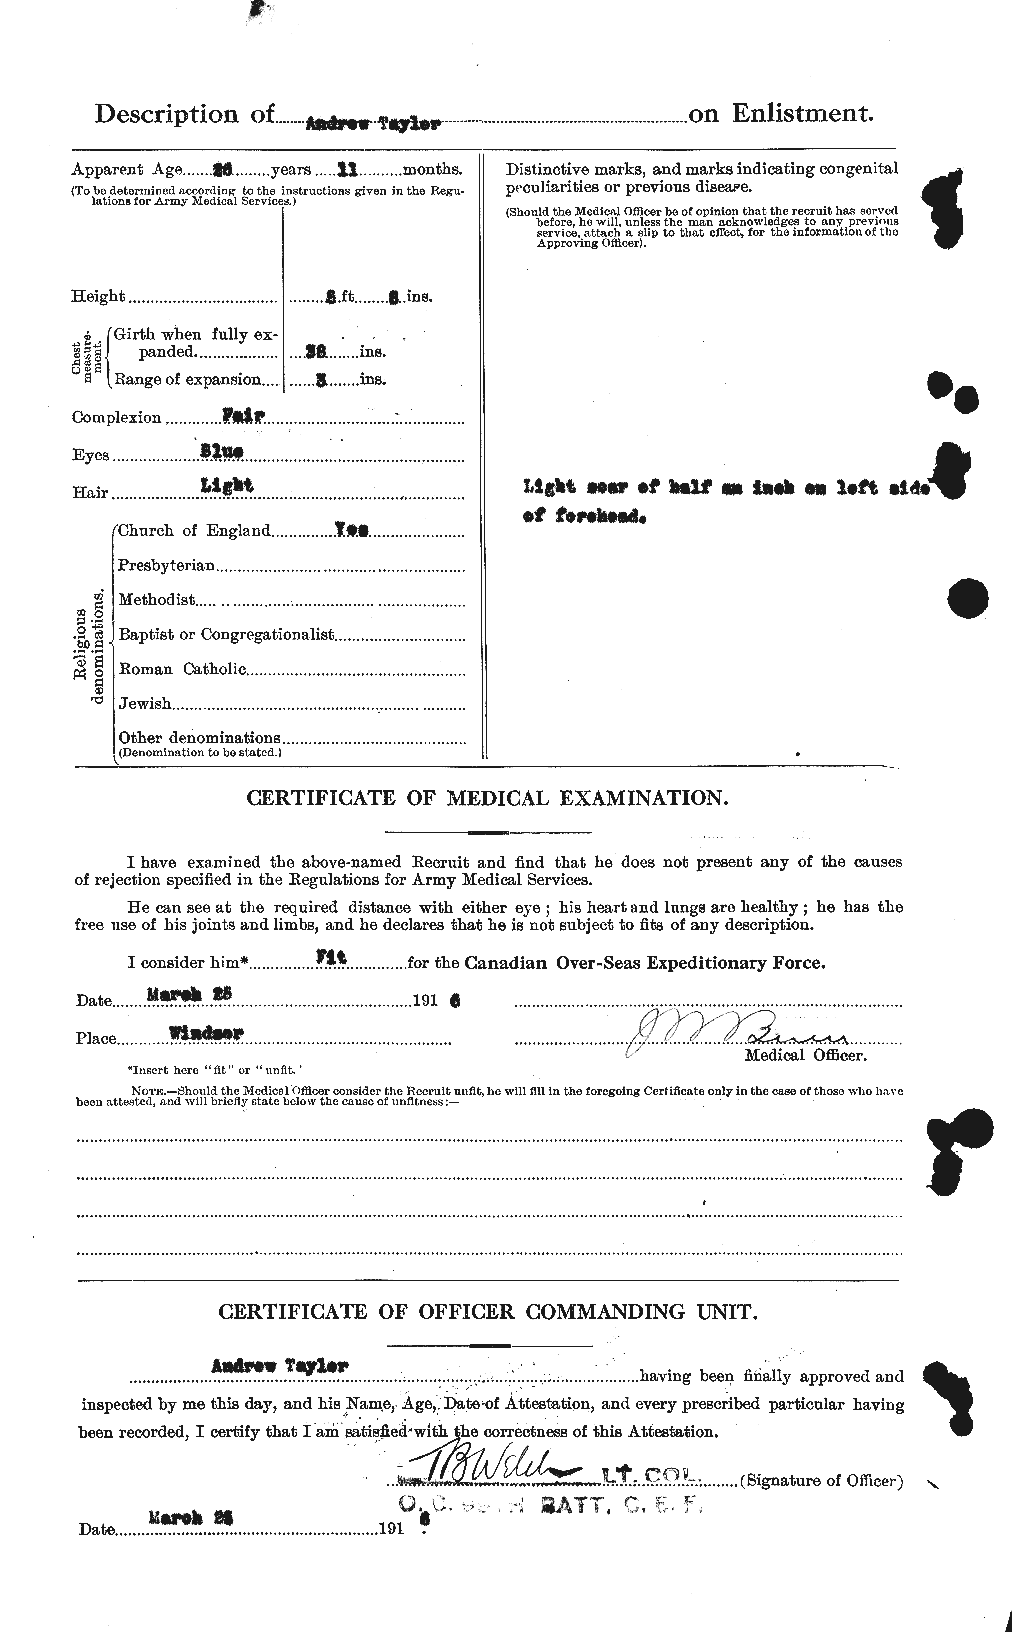 Personnel Records of the First World War - CEF 626221b